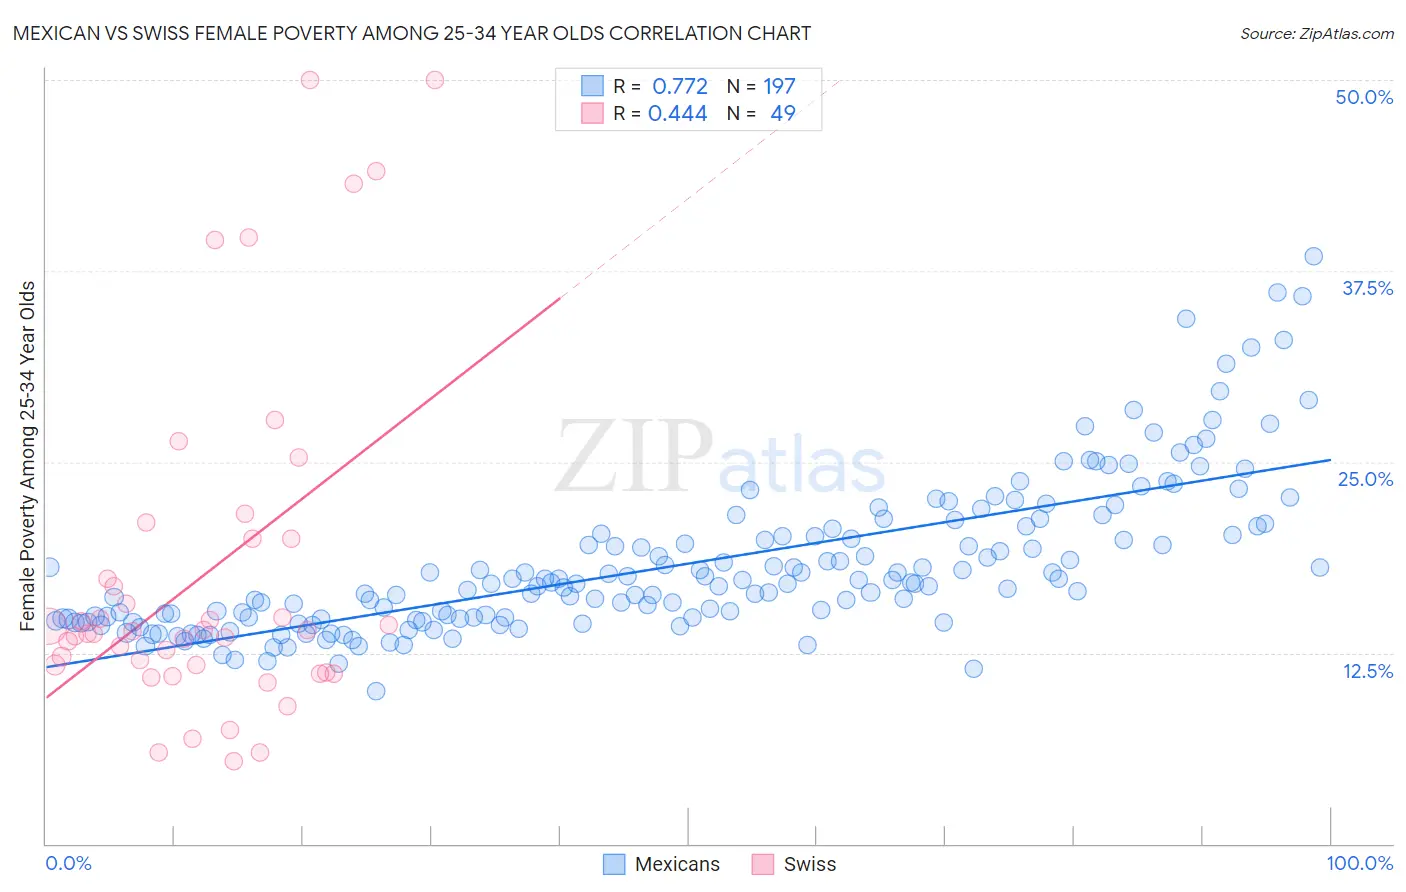 Mexican vs Swiss Female Poverty Among 25-34 Year Olds